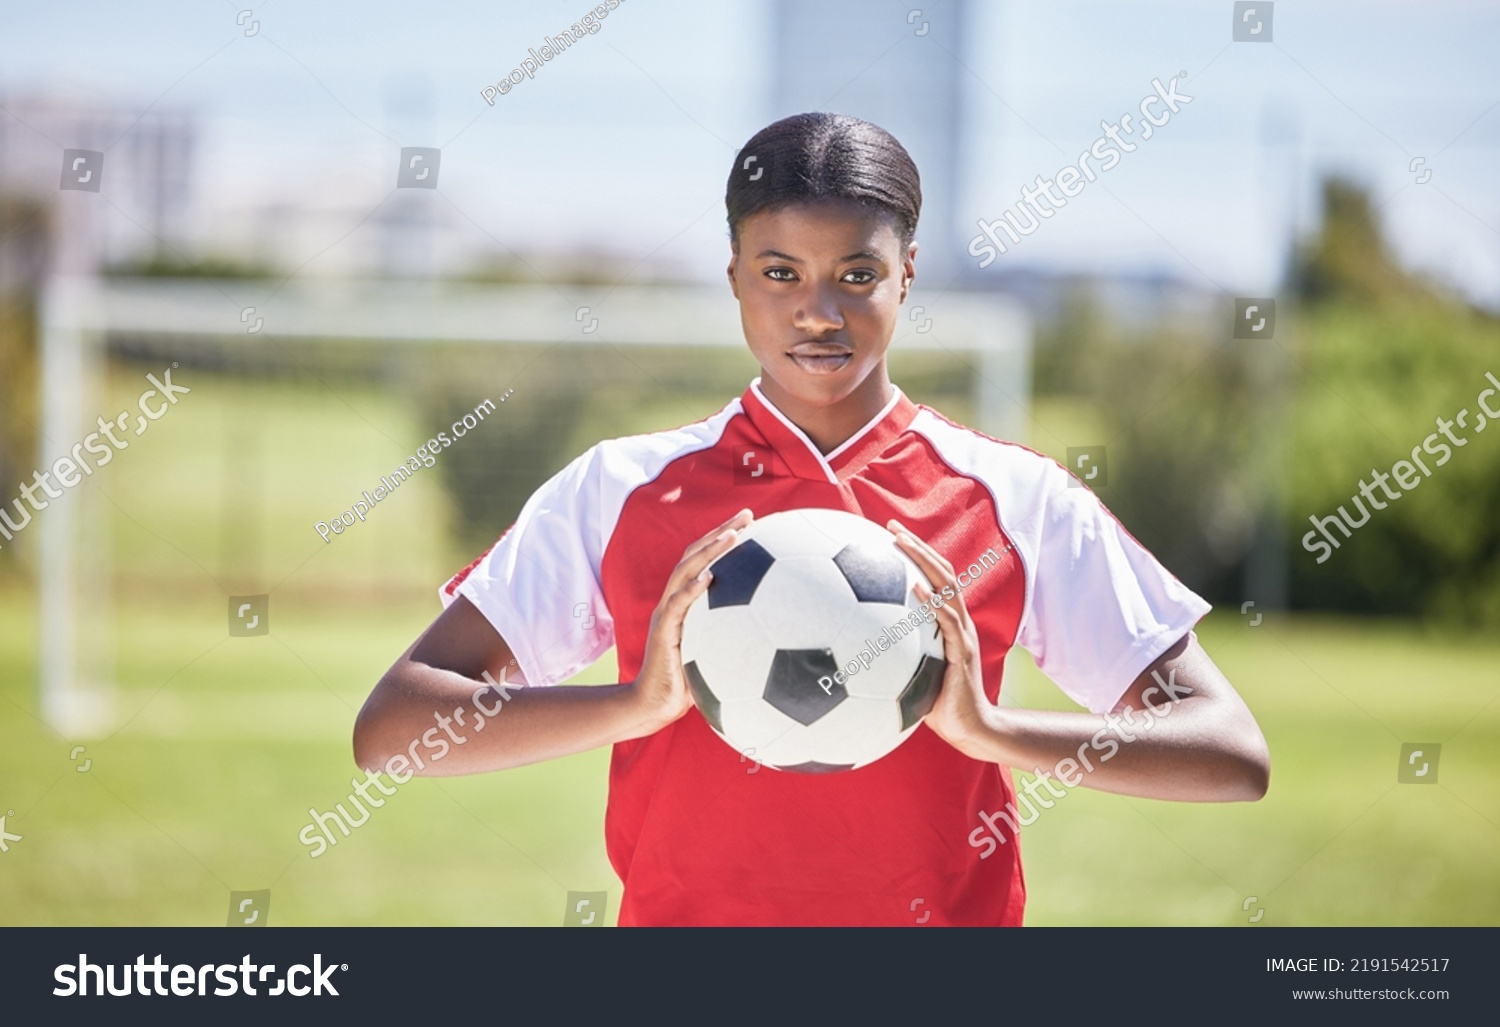 Soccer, football and sports with player, woman and athlete ready for a match, game or competition with ball on a pitch, field or stadium outdoor. Portrait of serious black female ready for training #2191542517